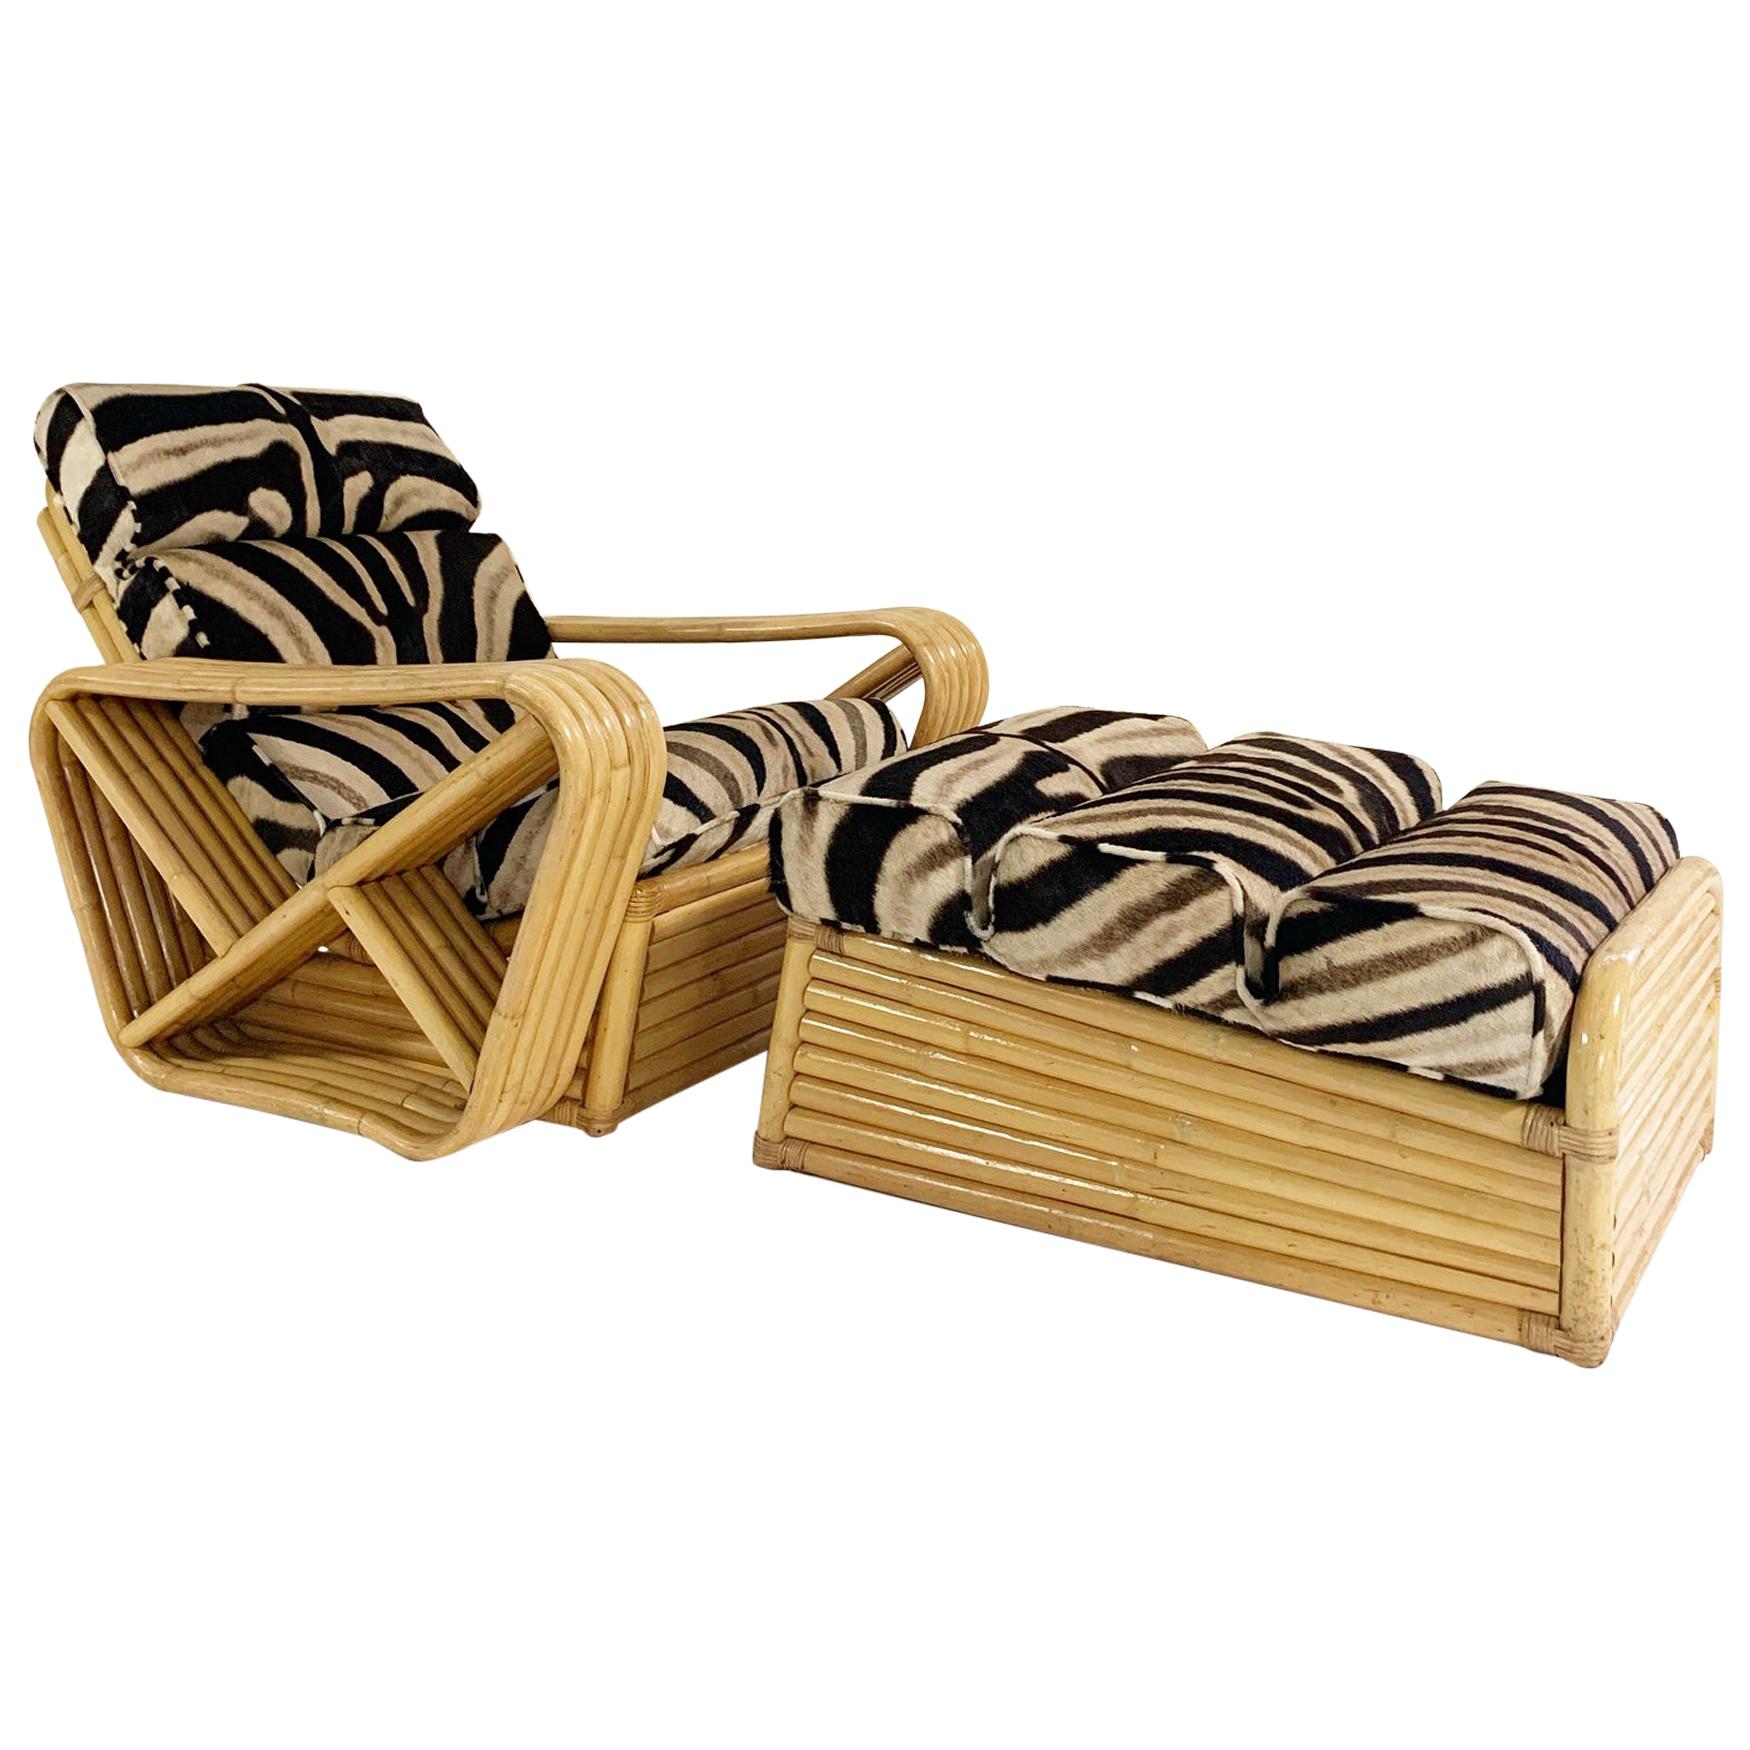 Vintage Rattan Lounge Chair and Ottoman in Zebra Hide